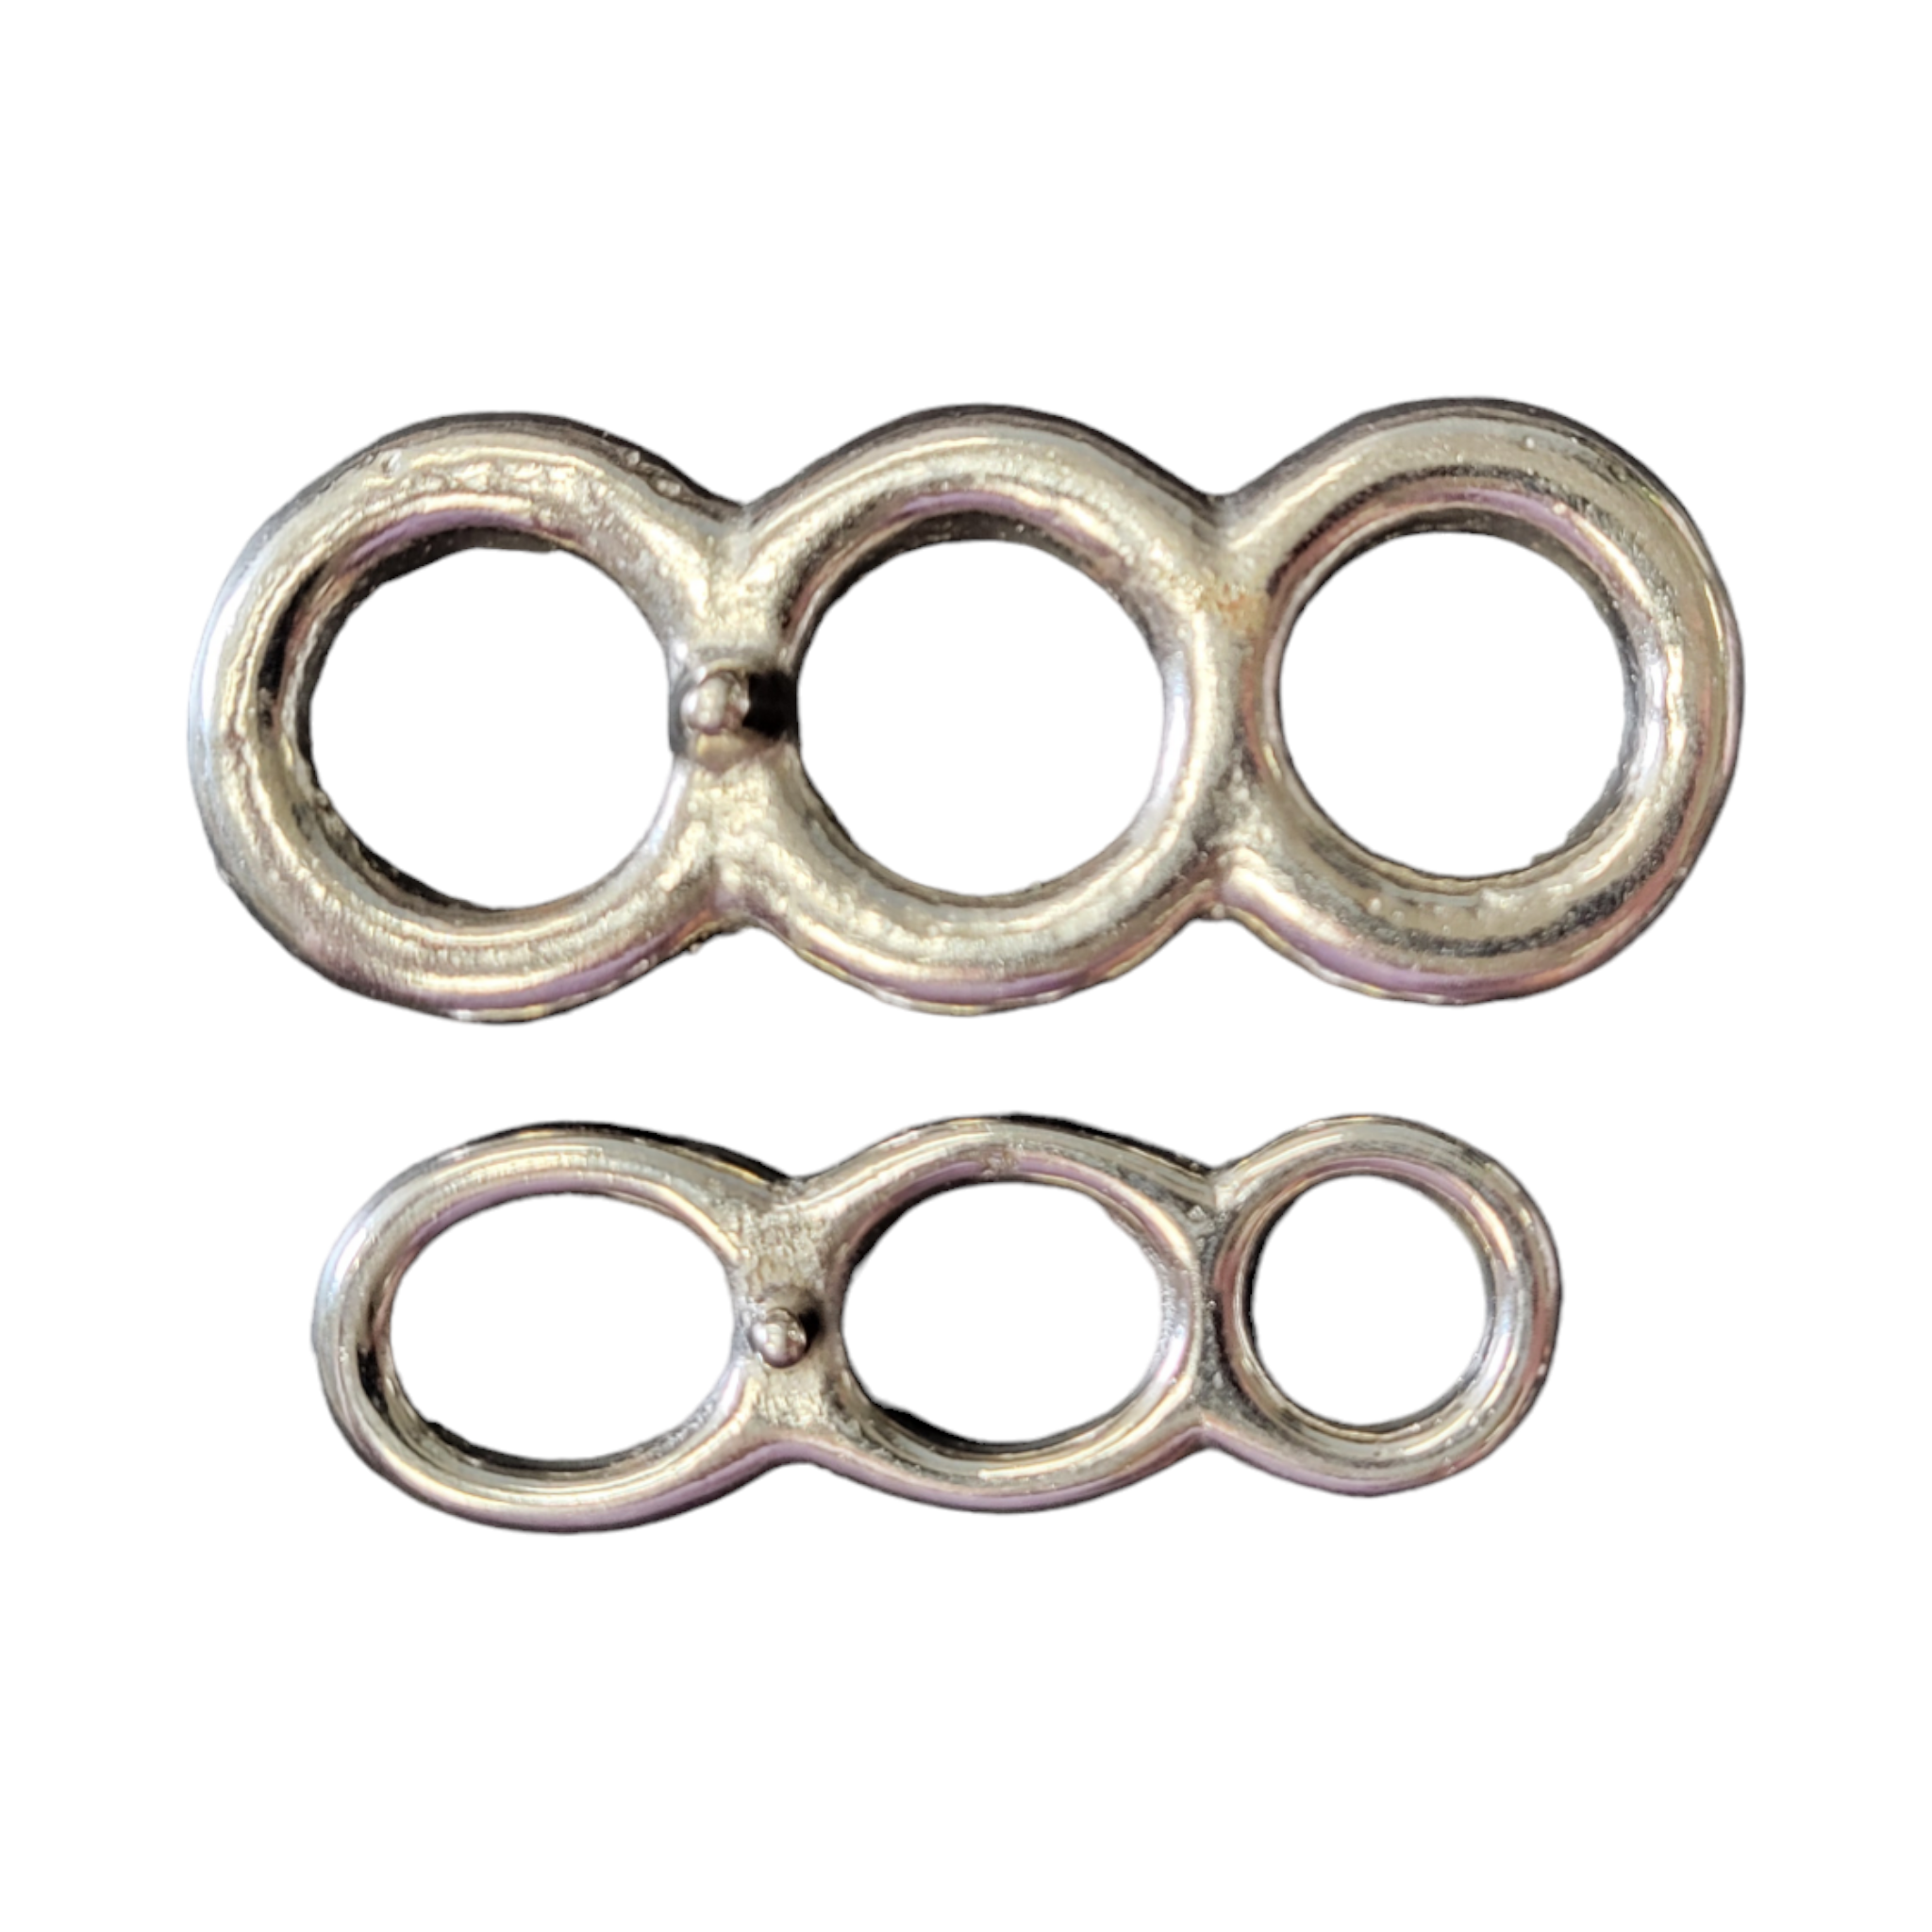 Adjustable Ring For Lead/Neck Rope